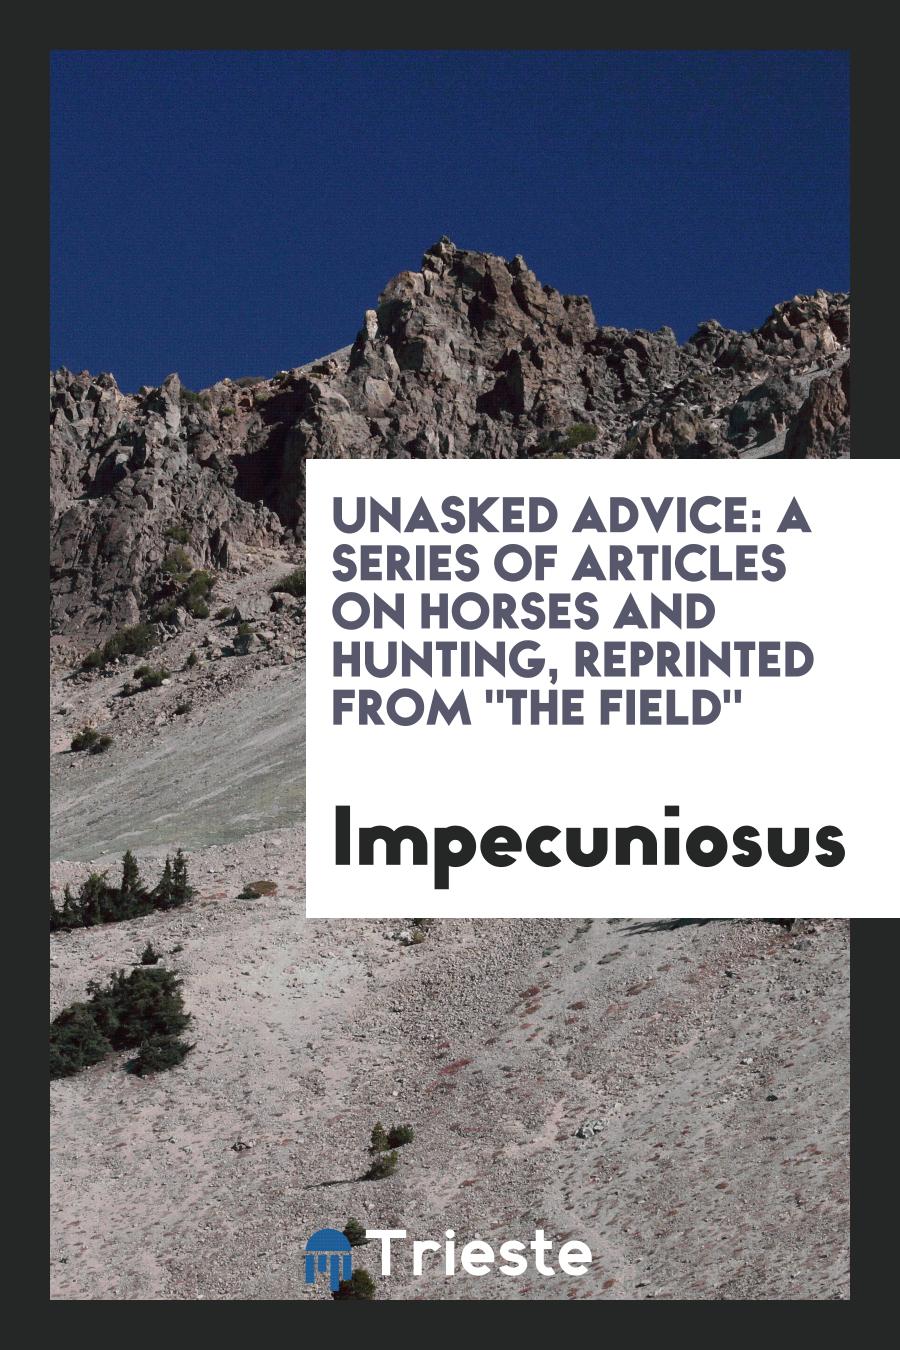 Unasked Advice: A Series of Articles on Horses and Hunting, Reprinted from "The Field"